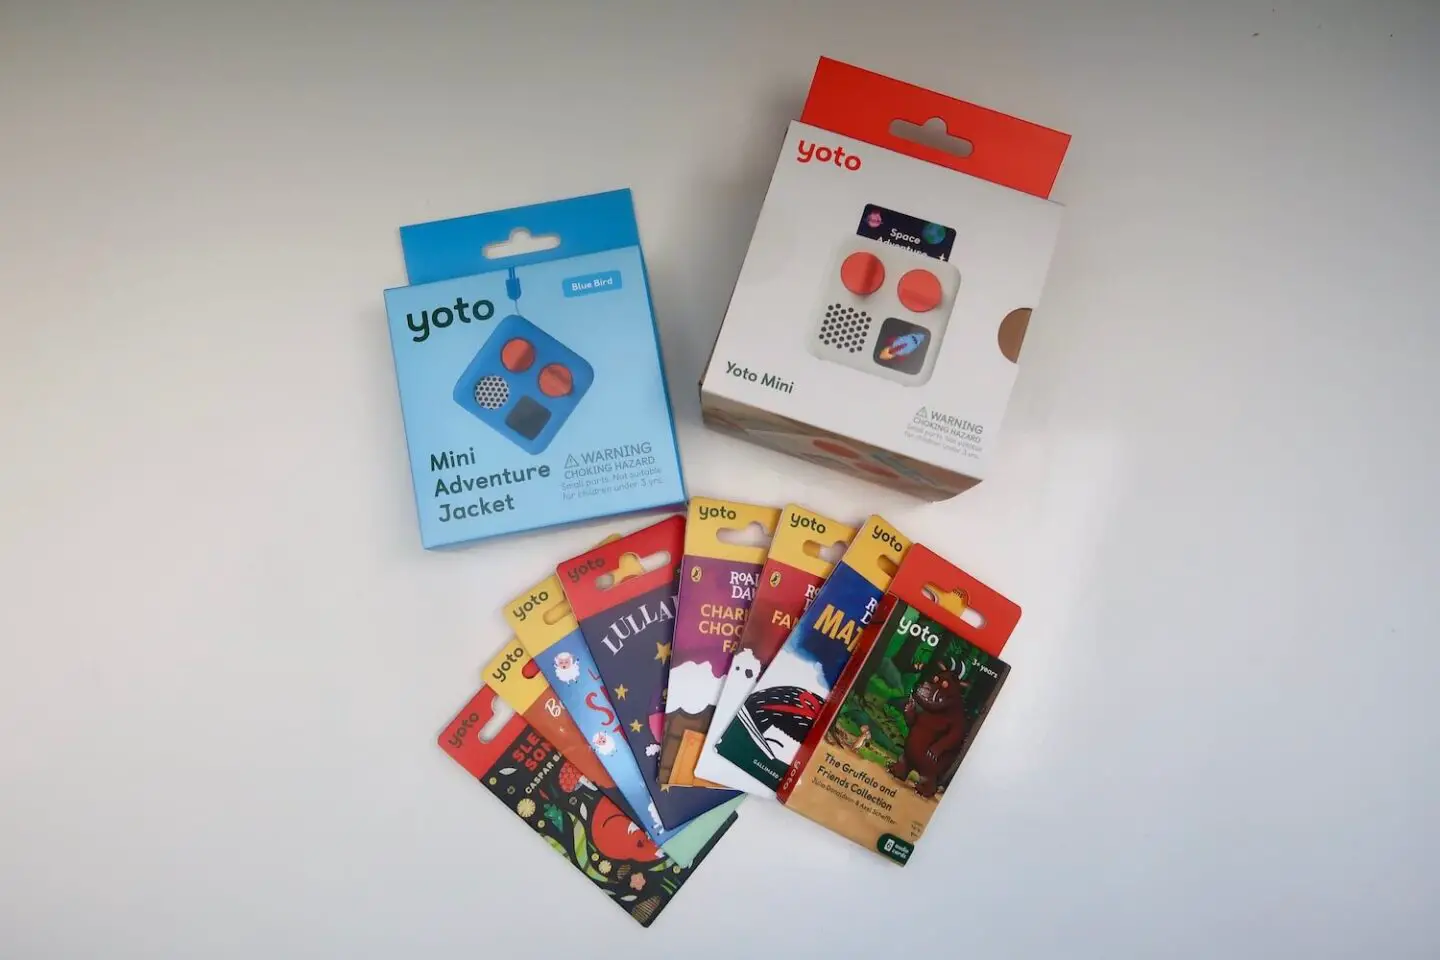 The packaging for a Yoto mini player, adventure jacket and an array for Yoto cards